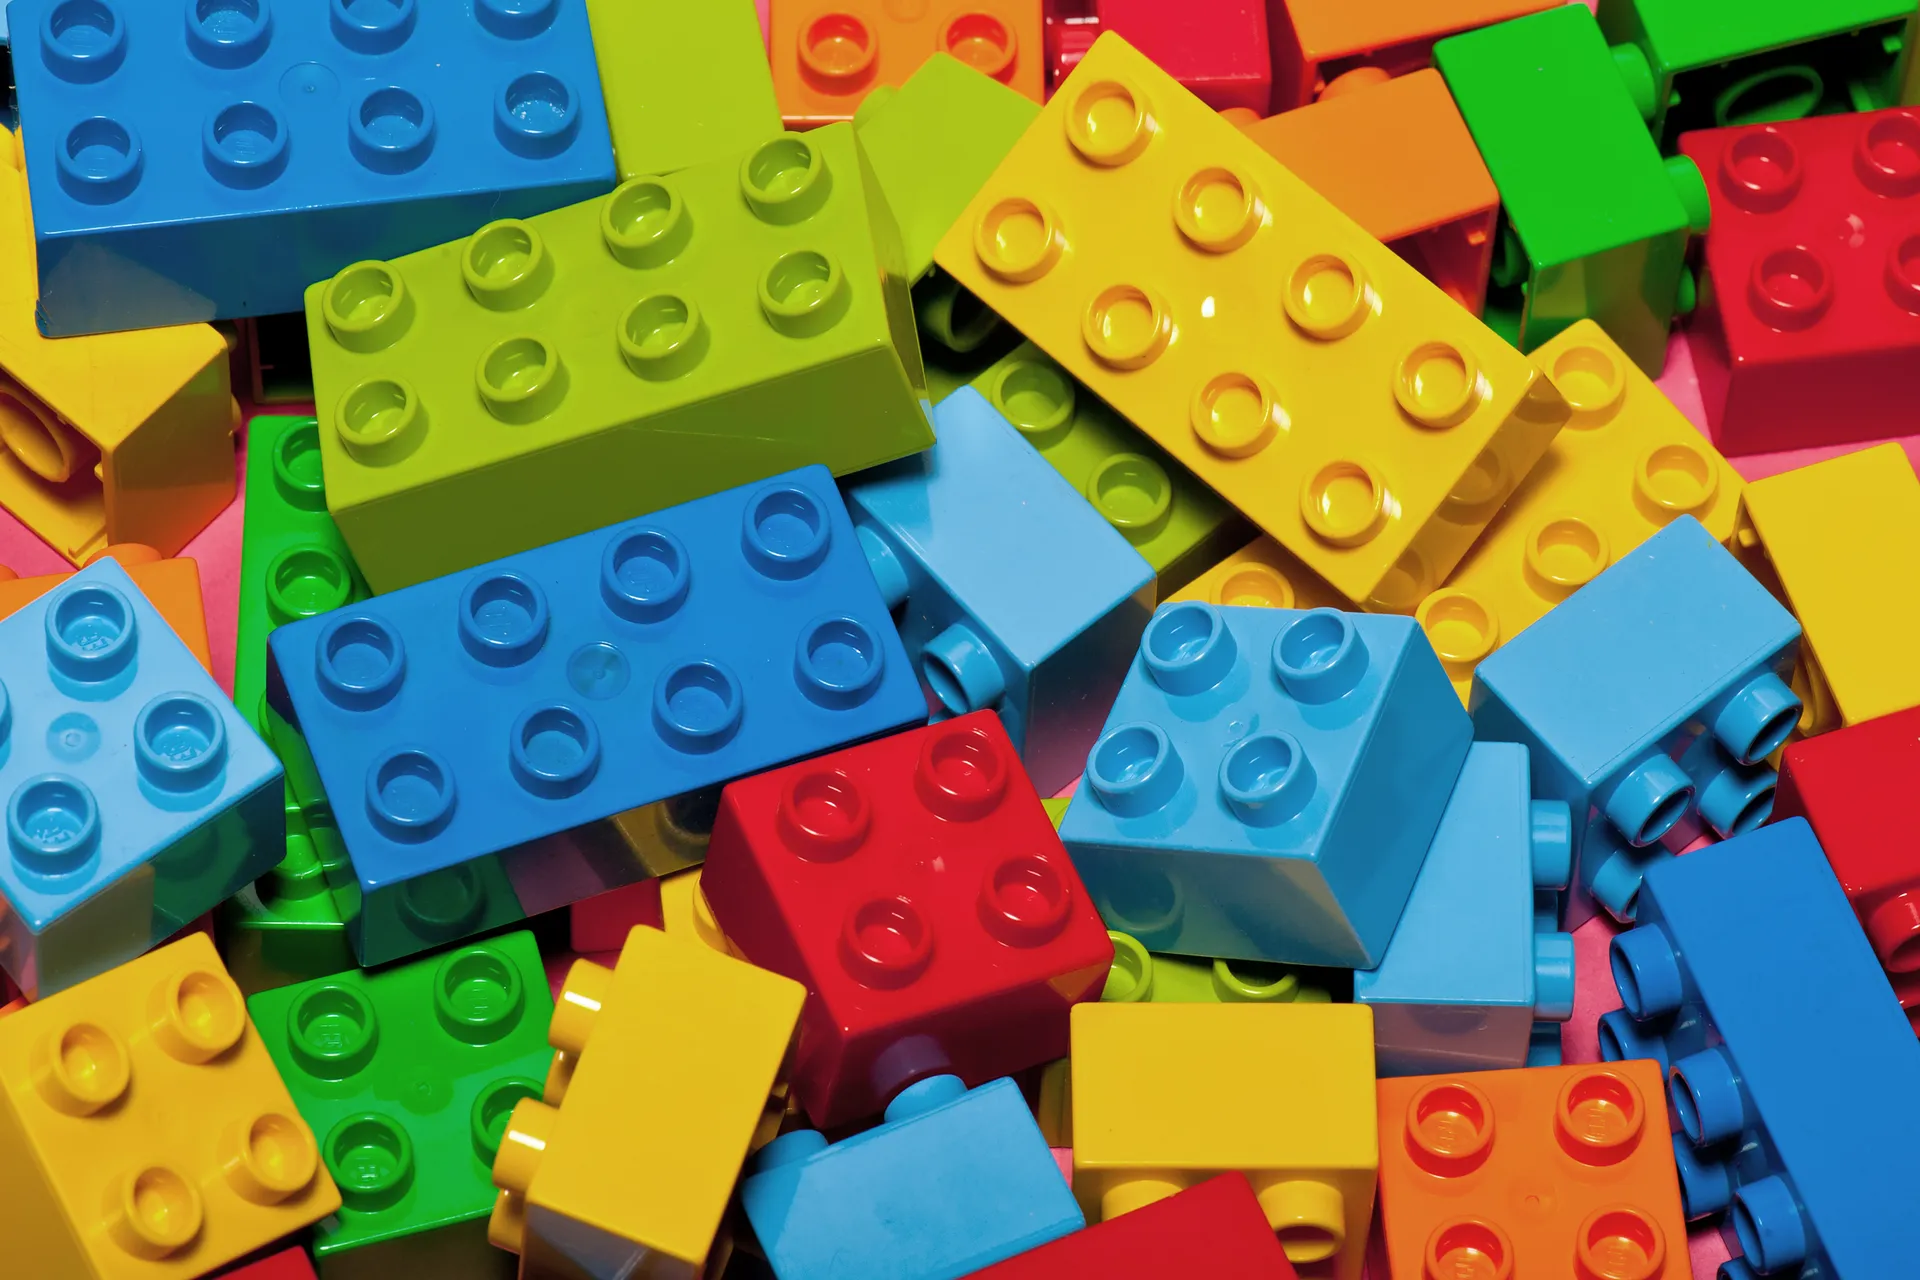 assorted lego blocks of various colors